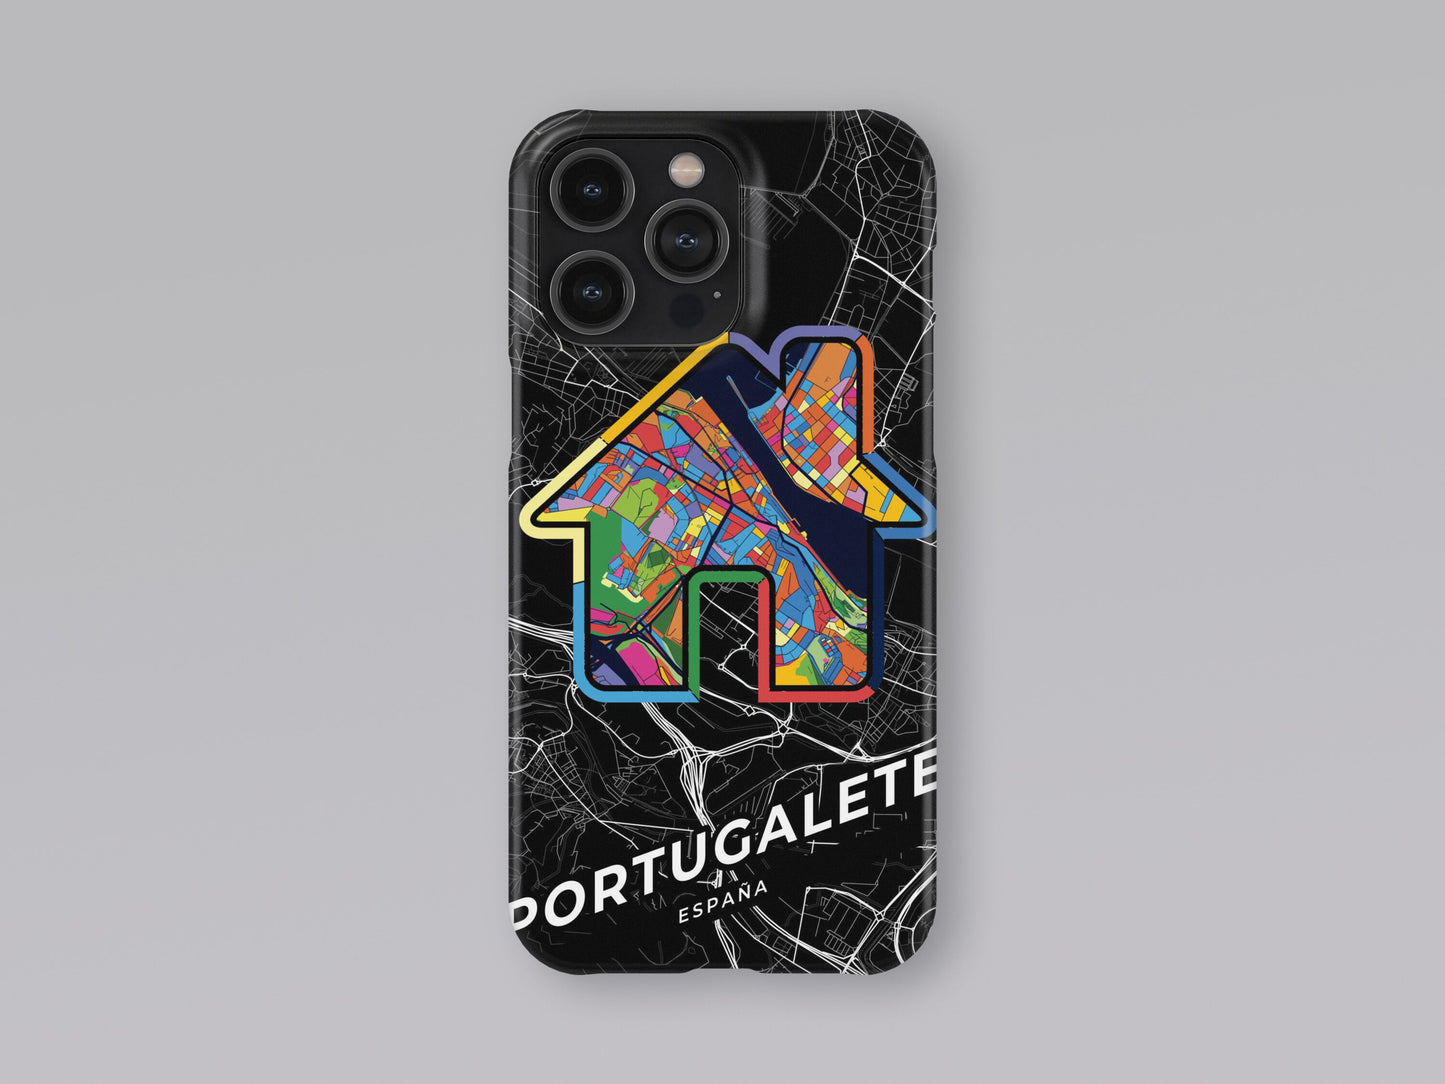 Portugalete Spain slim phone case with colorful icon. Birthday, wedding or housewarming gift. Couple match cases. 3